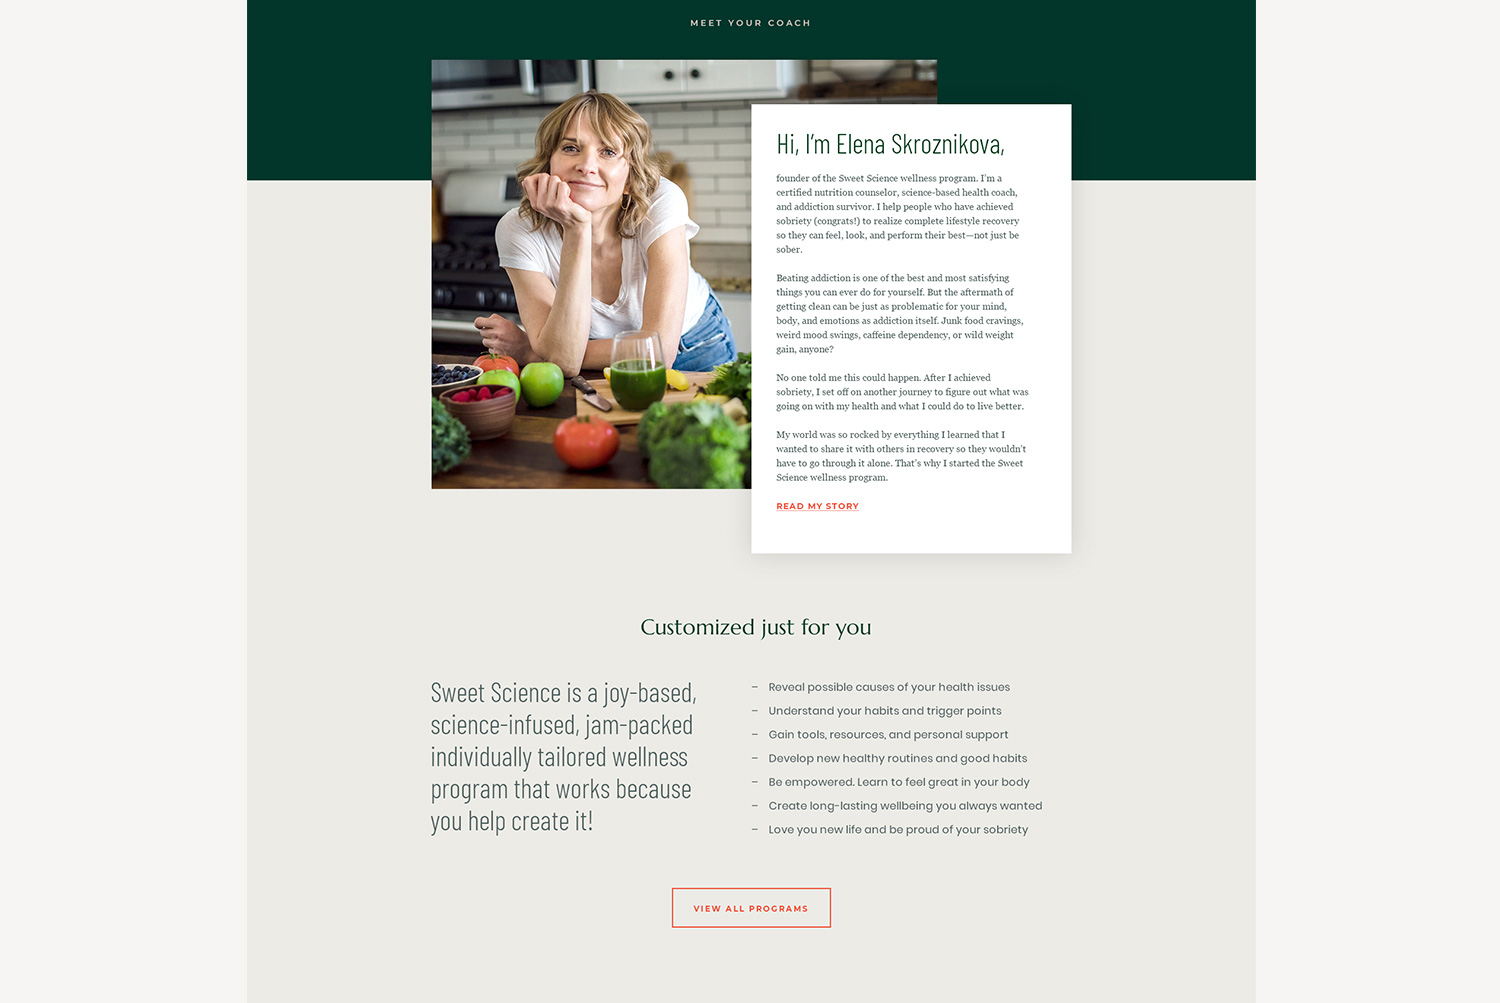 Sweet Science Wellness and Nutrition Website Design Meet Your Coach